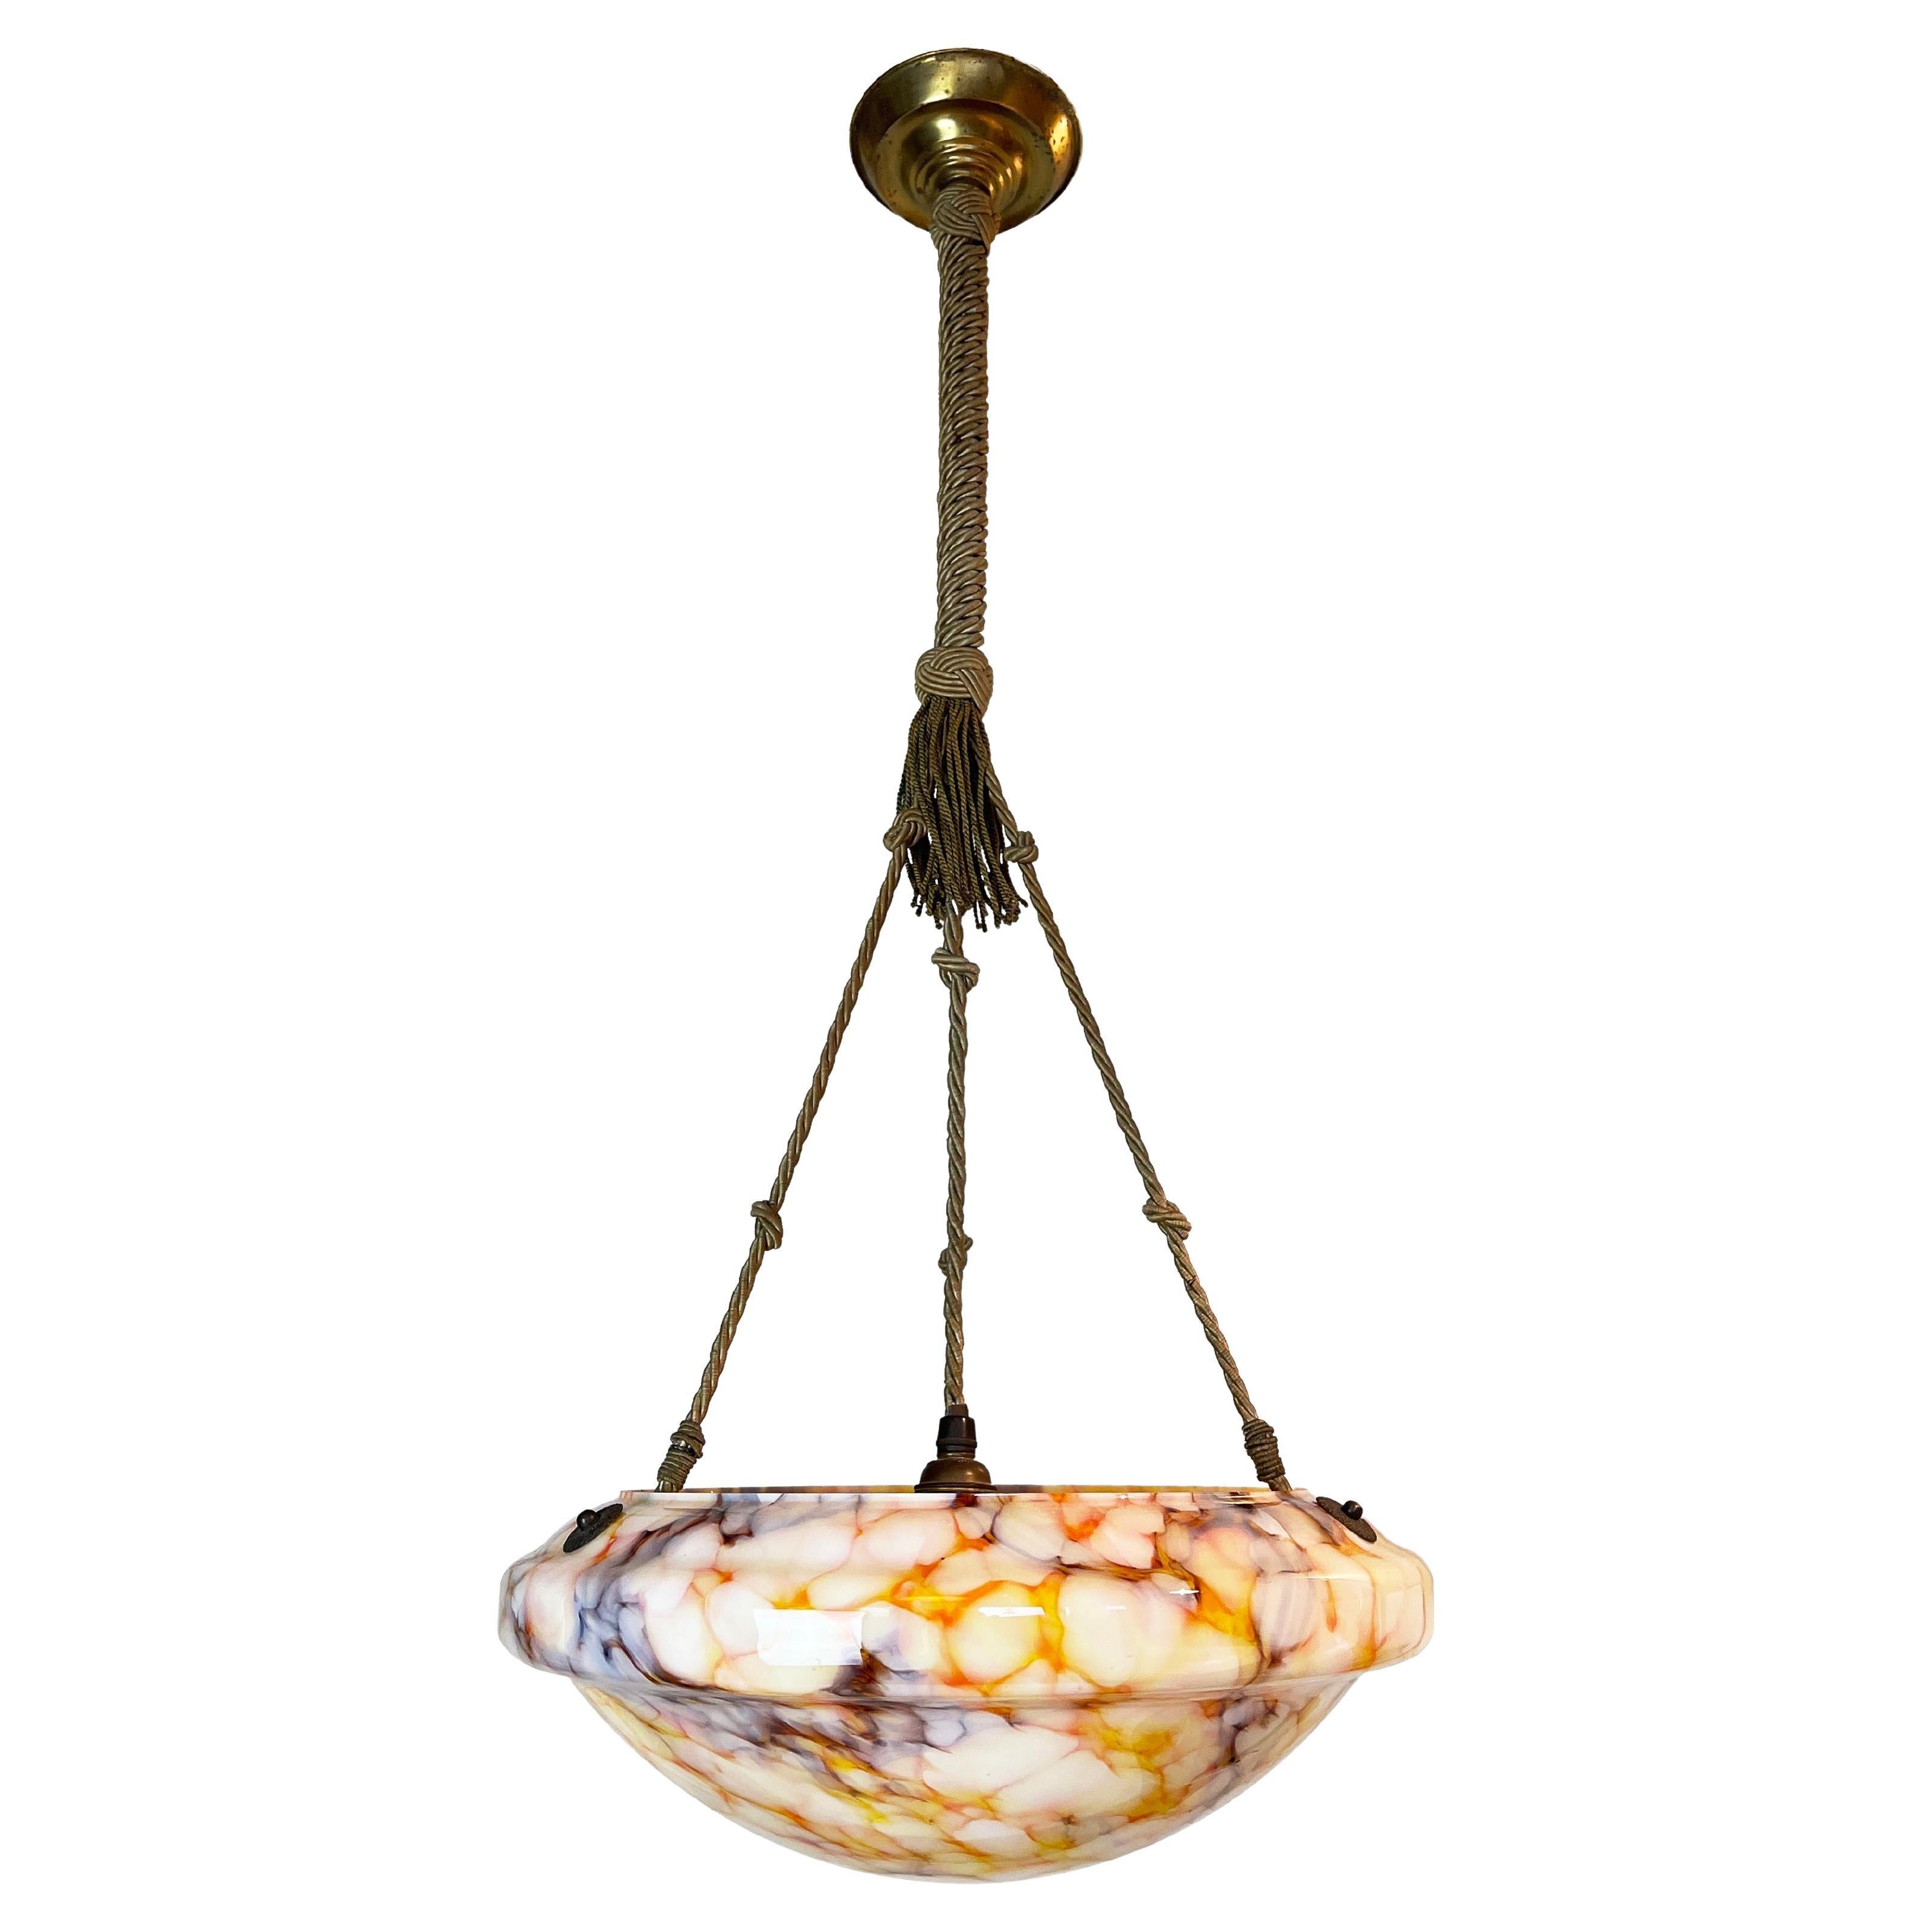 Art Deco Marbled Glass Ceiling Lamp, Orange Alabaster Style, 1940s, Germany For Sale